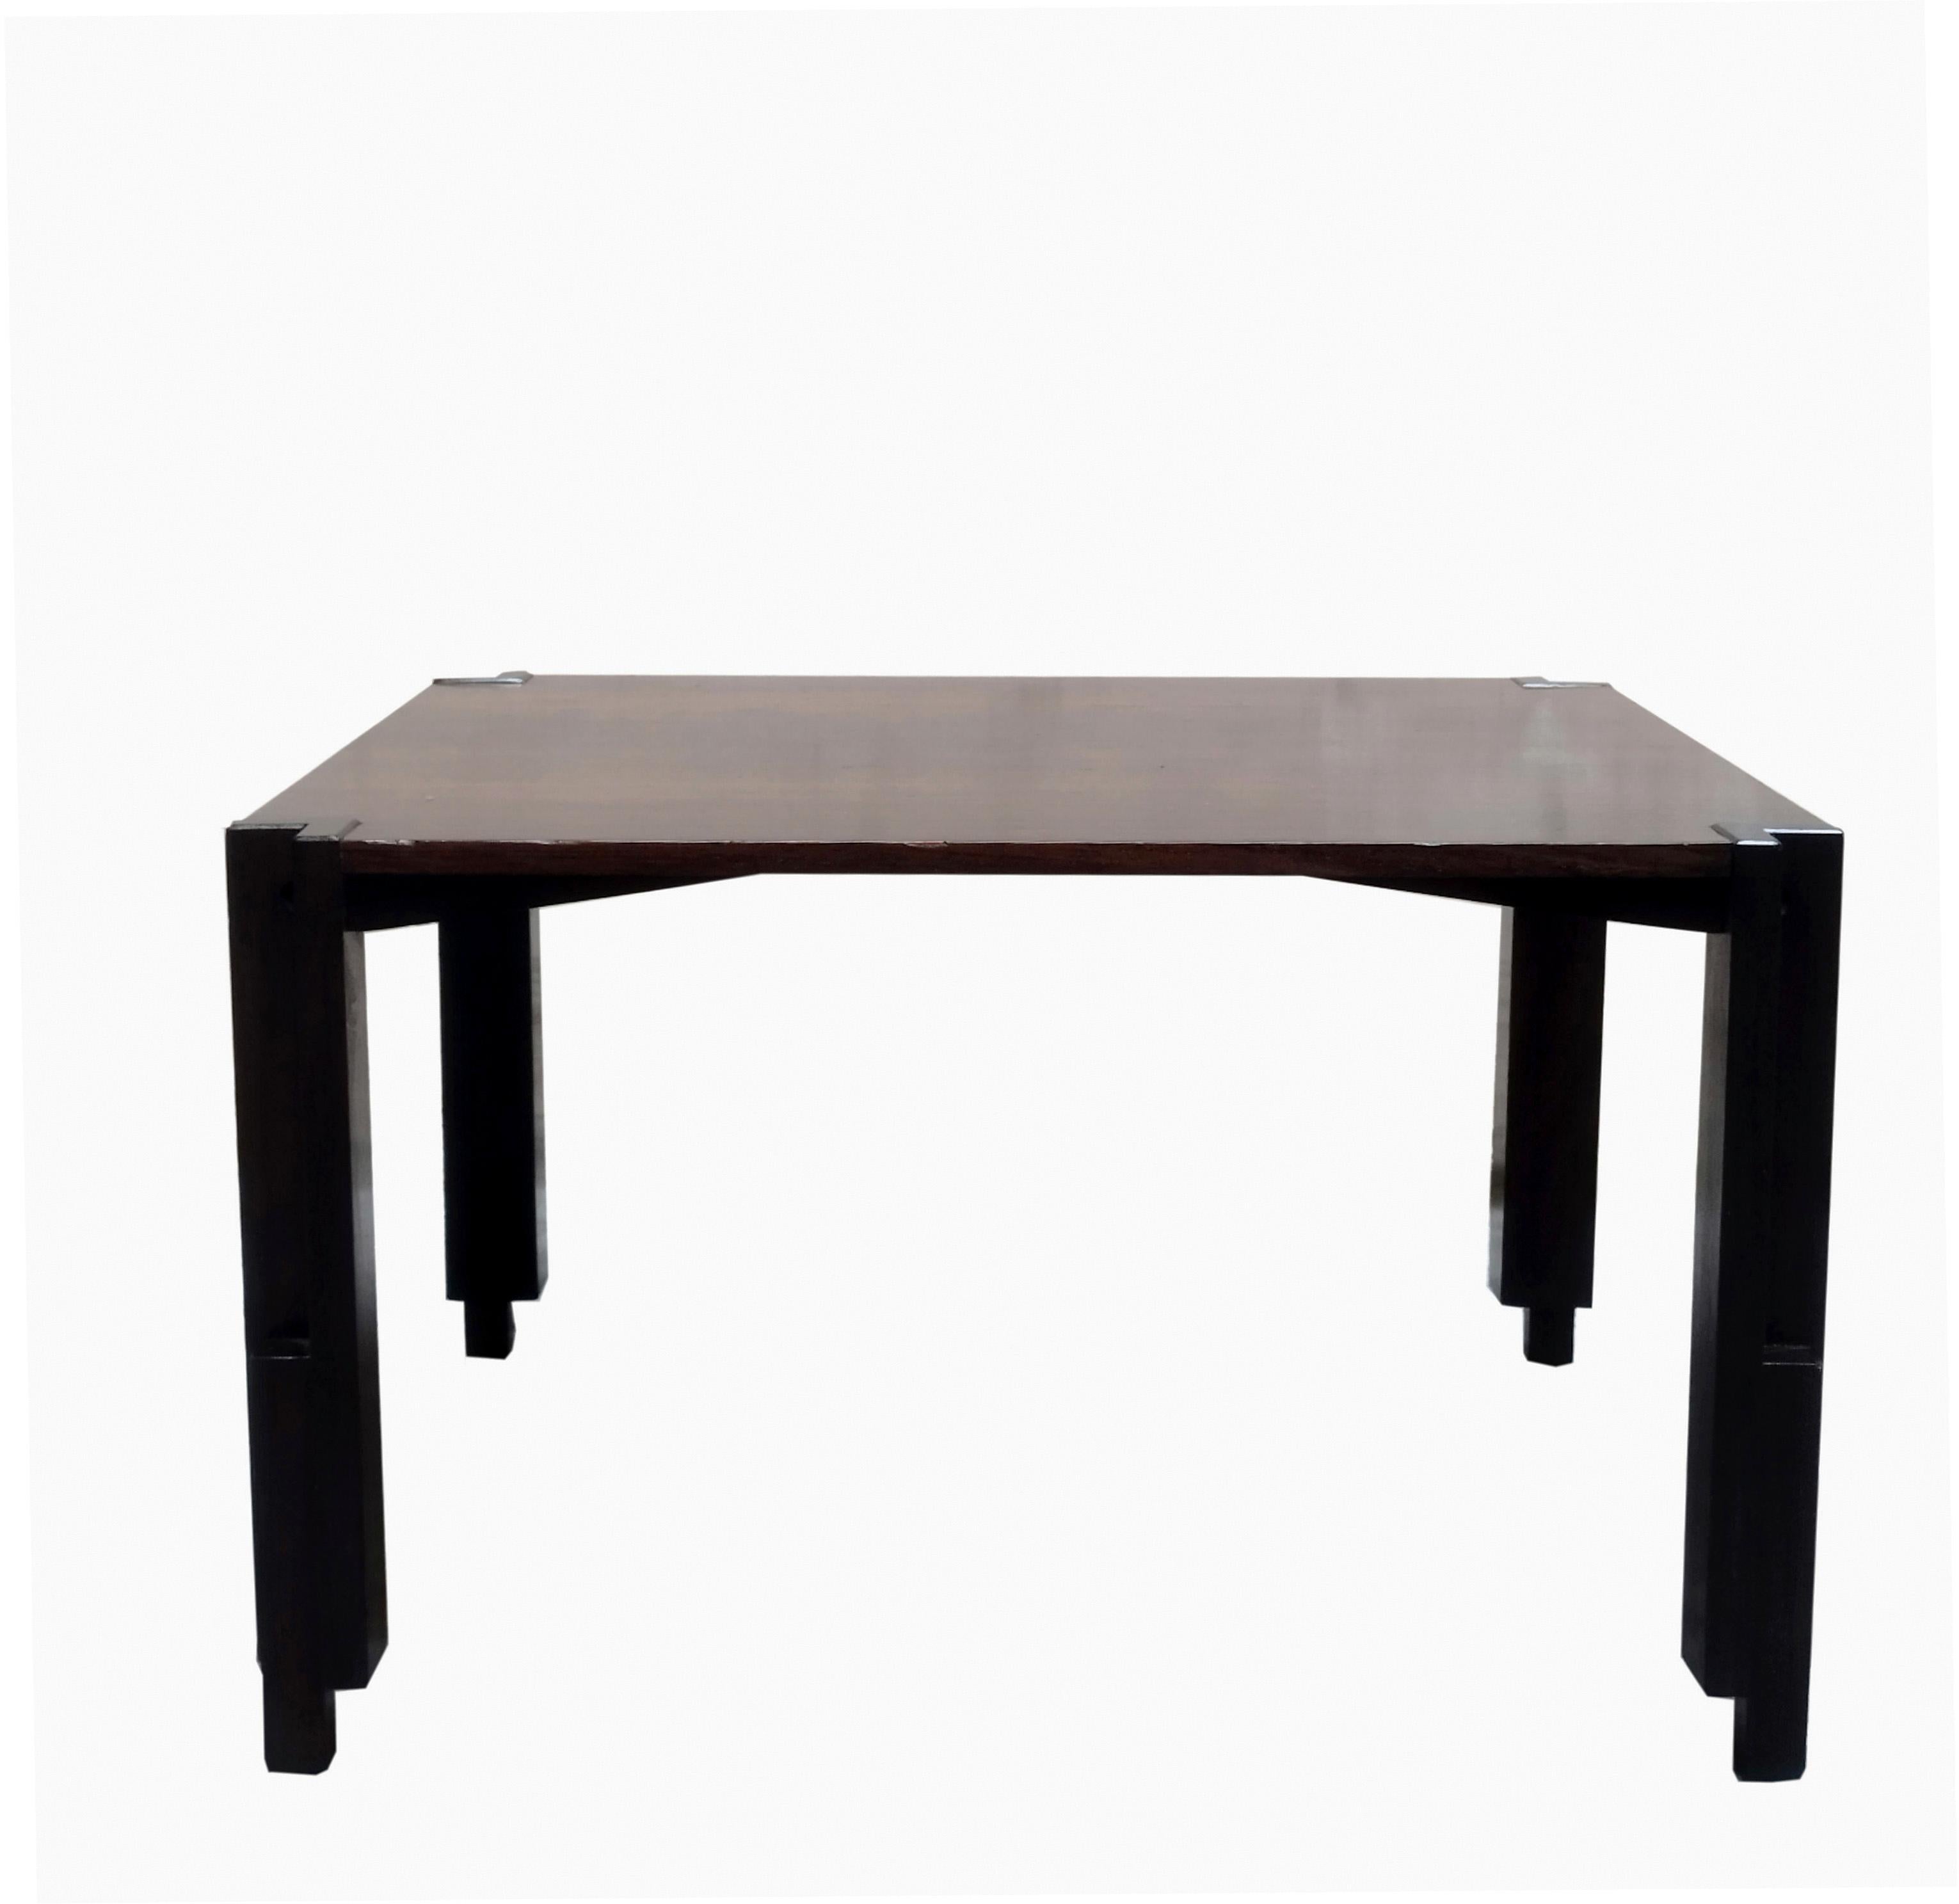 Beautiful wooden coffee table, understated and clean. This coffee table is very elegant in its simplicity. It includes 4 vertical feet and a wooden frame connected with two remarkable bolts. In very good overall condition, with some slight traces of